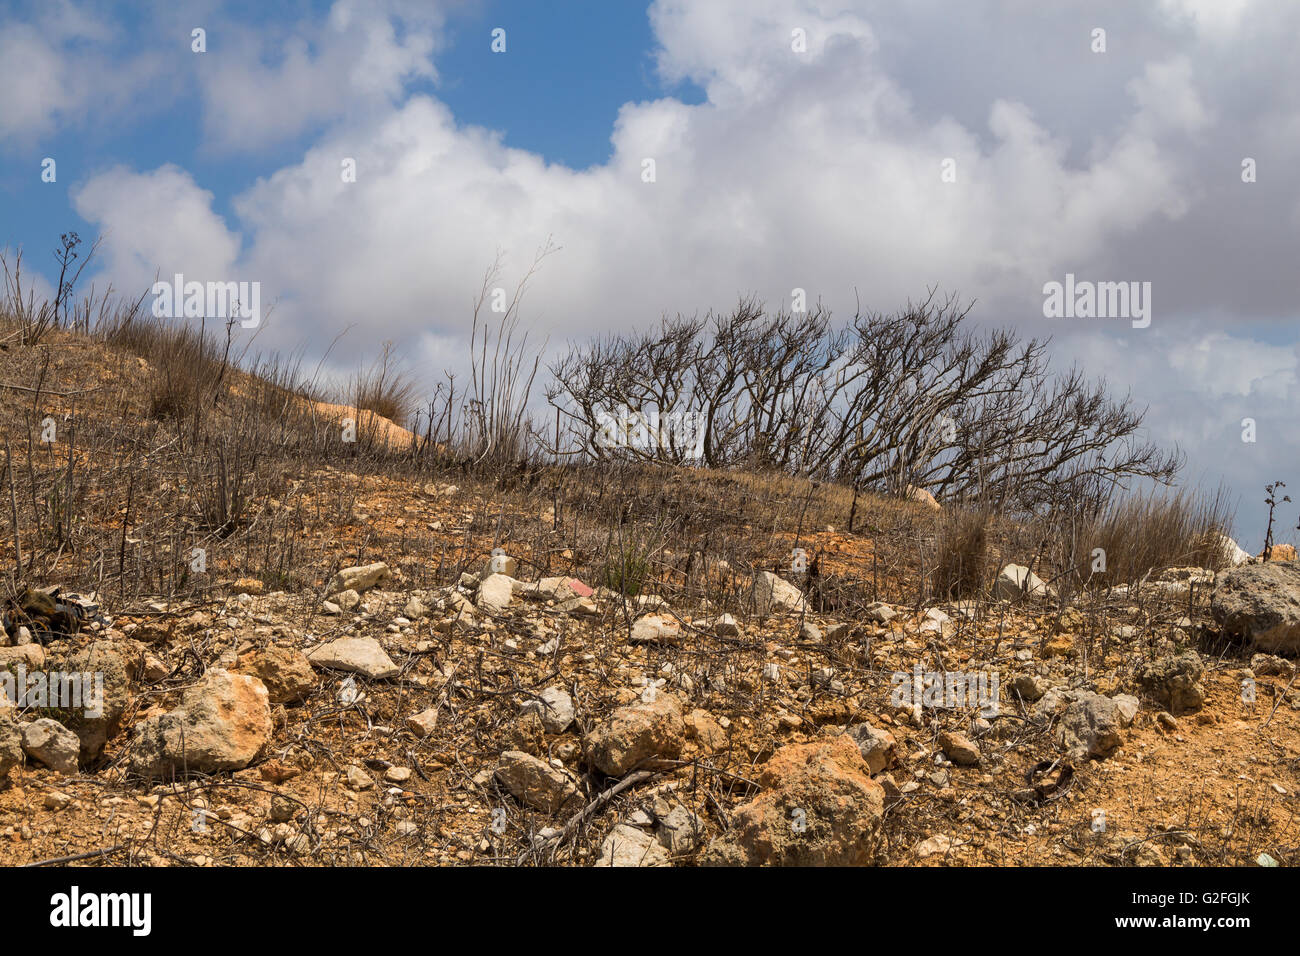 Dry soil with many stones, typical for the island Malta. Coastal part of the island. Intense white clouds on the blue sky. Stock Photo